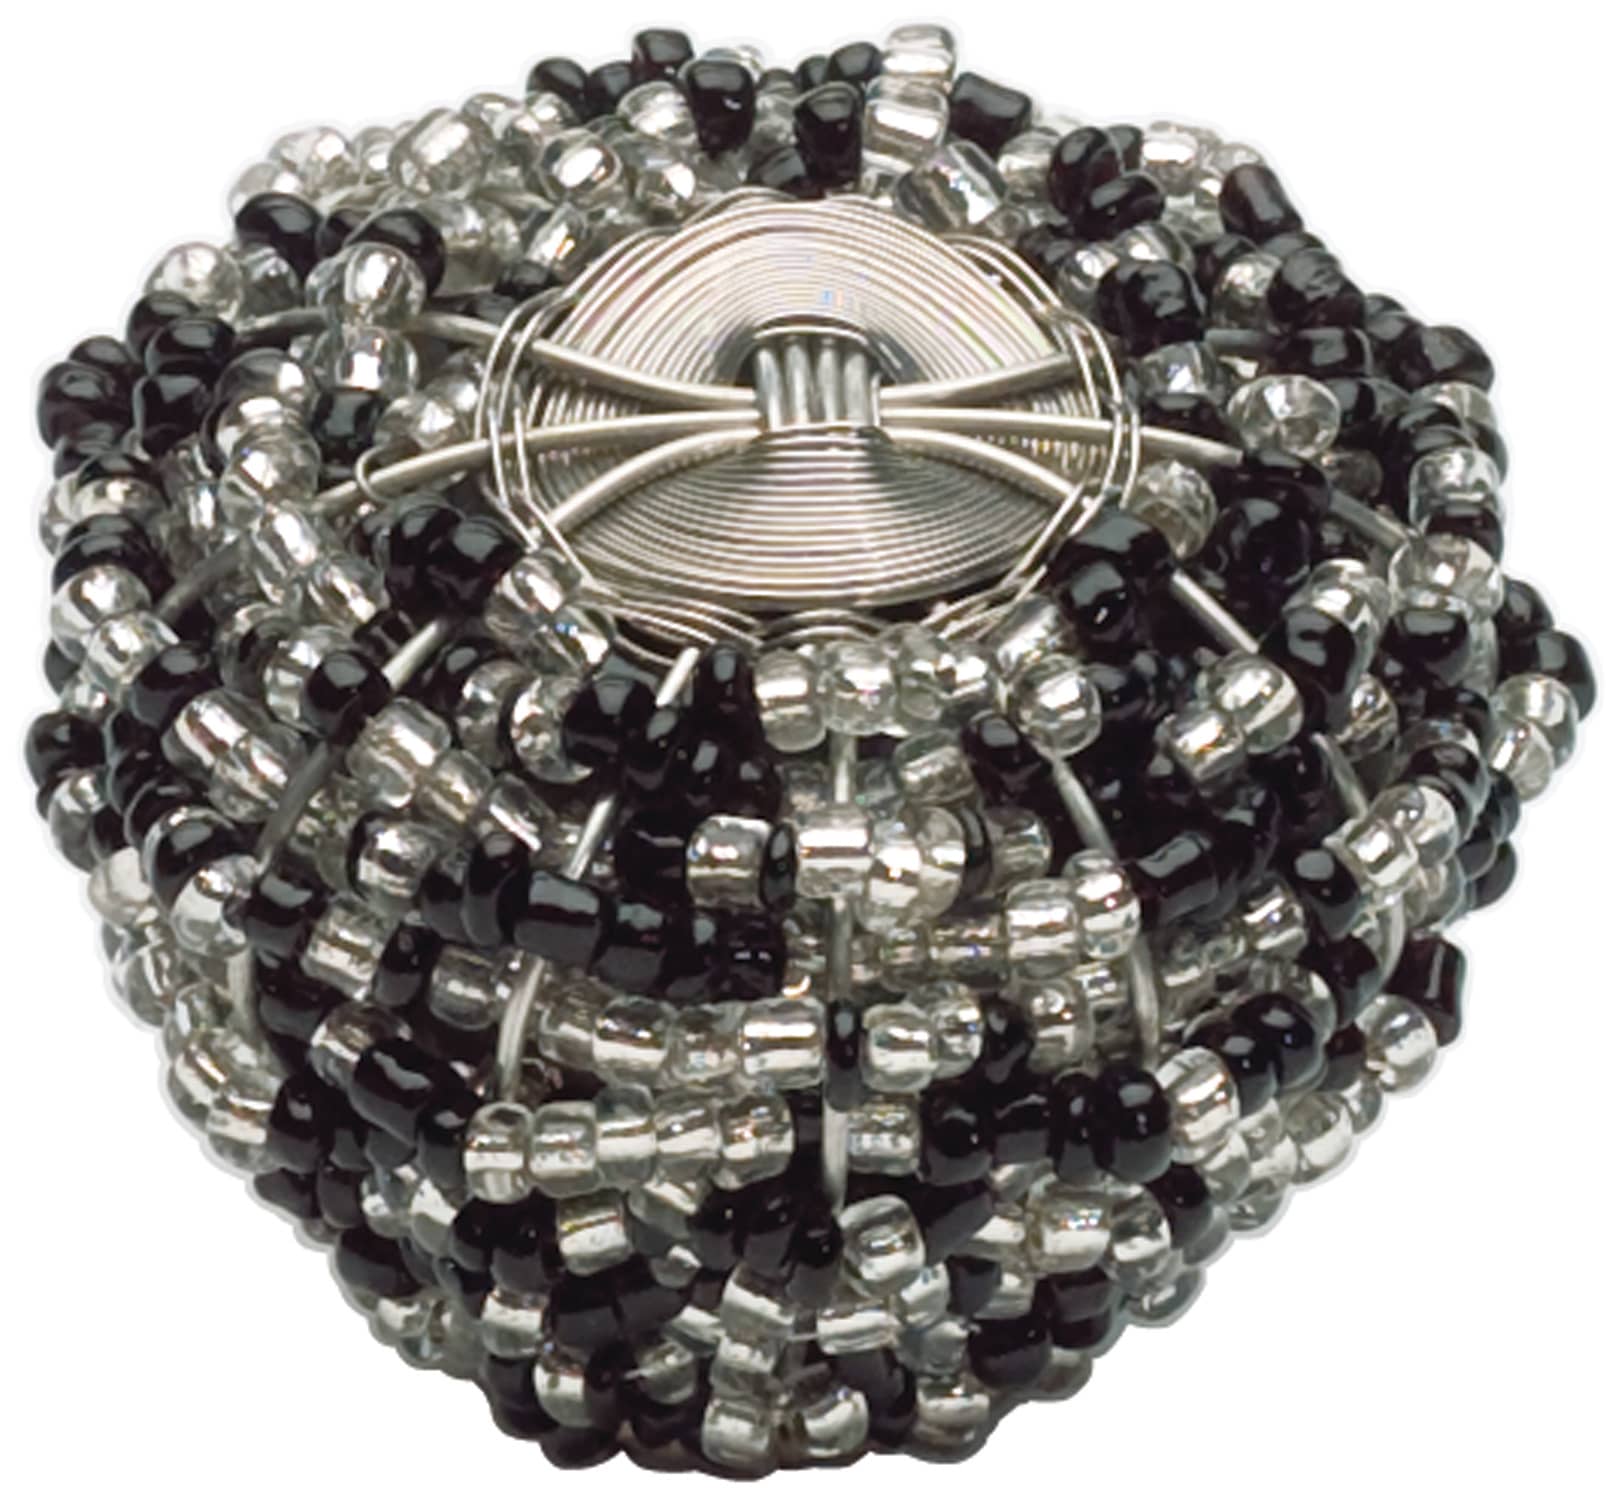 Atlas Homewares 3185 2-Inch Large Beaded Knob from The Bollywood Beauties Black and White